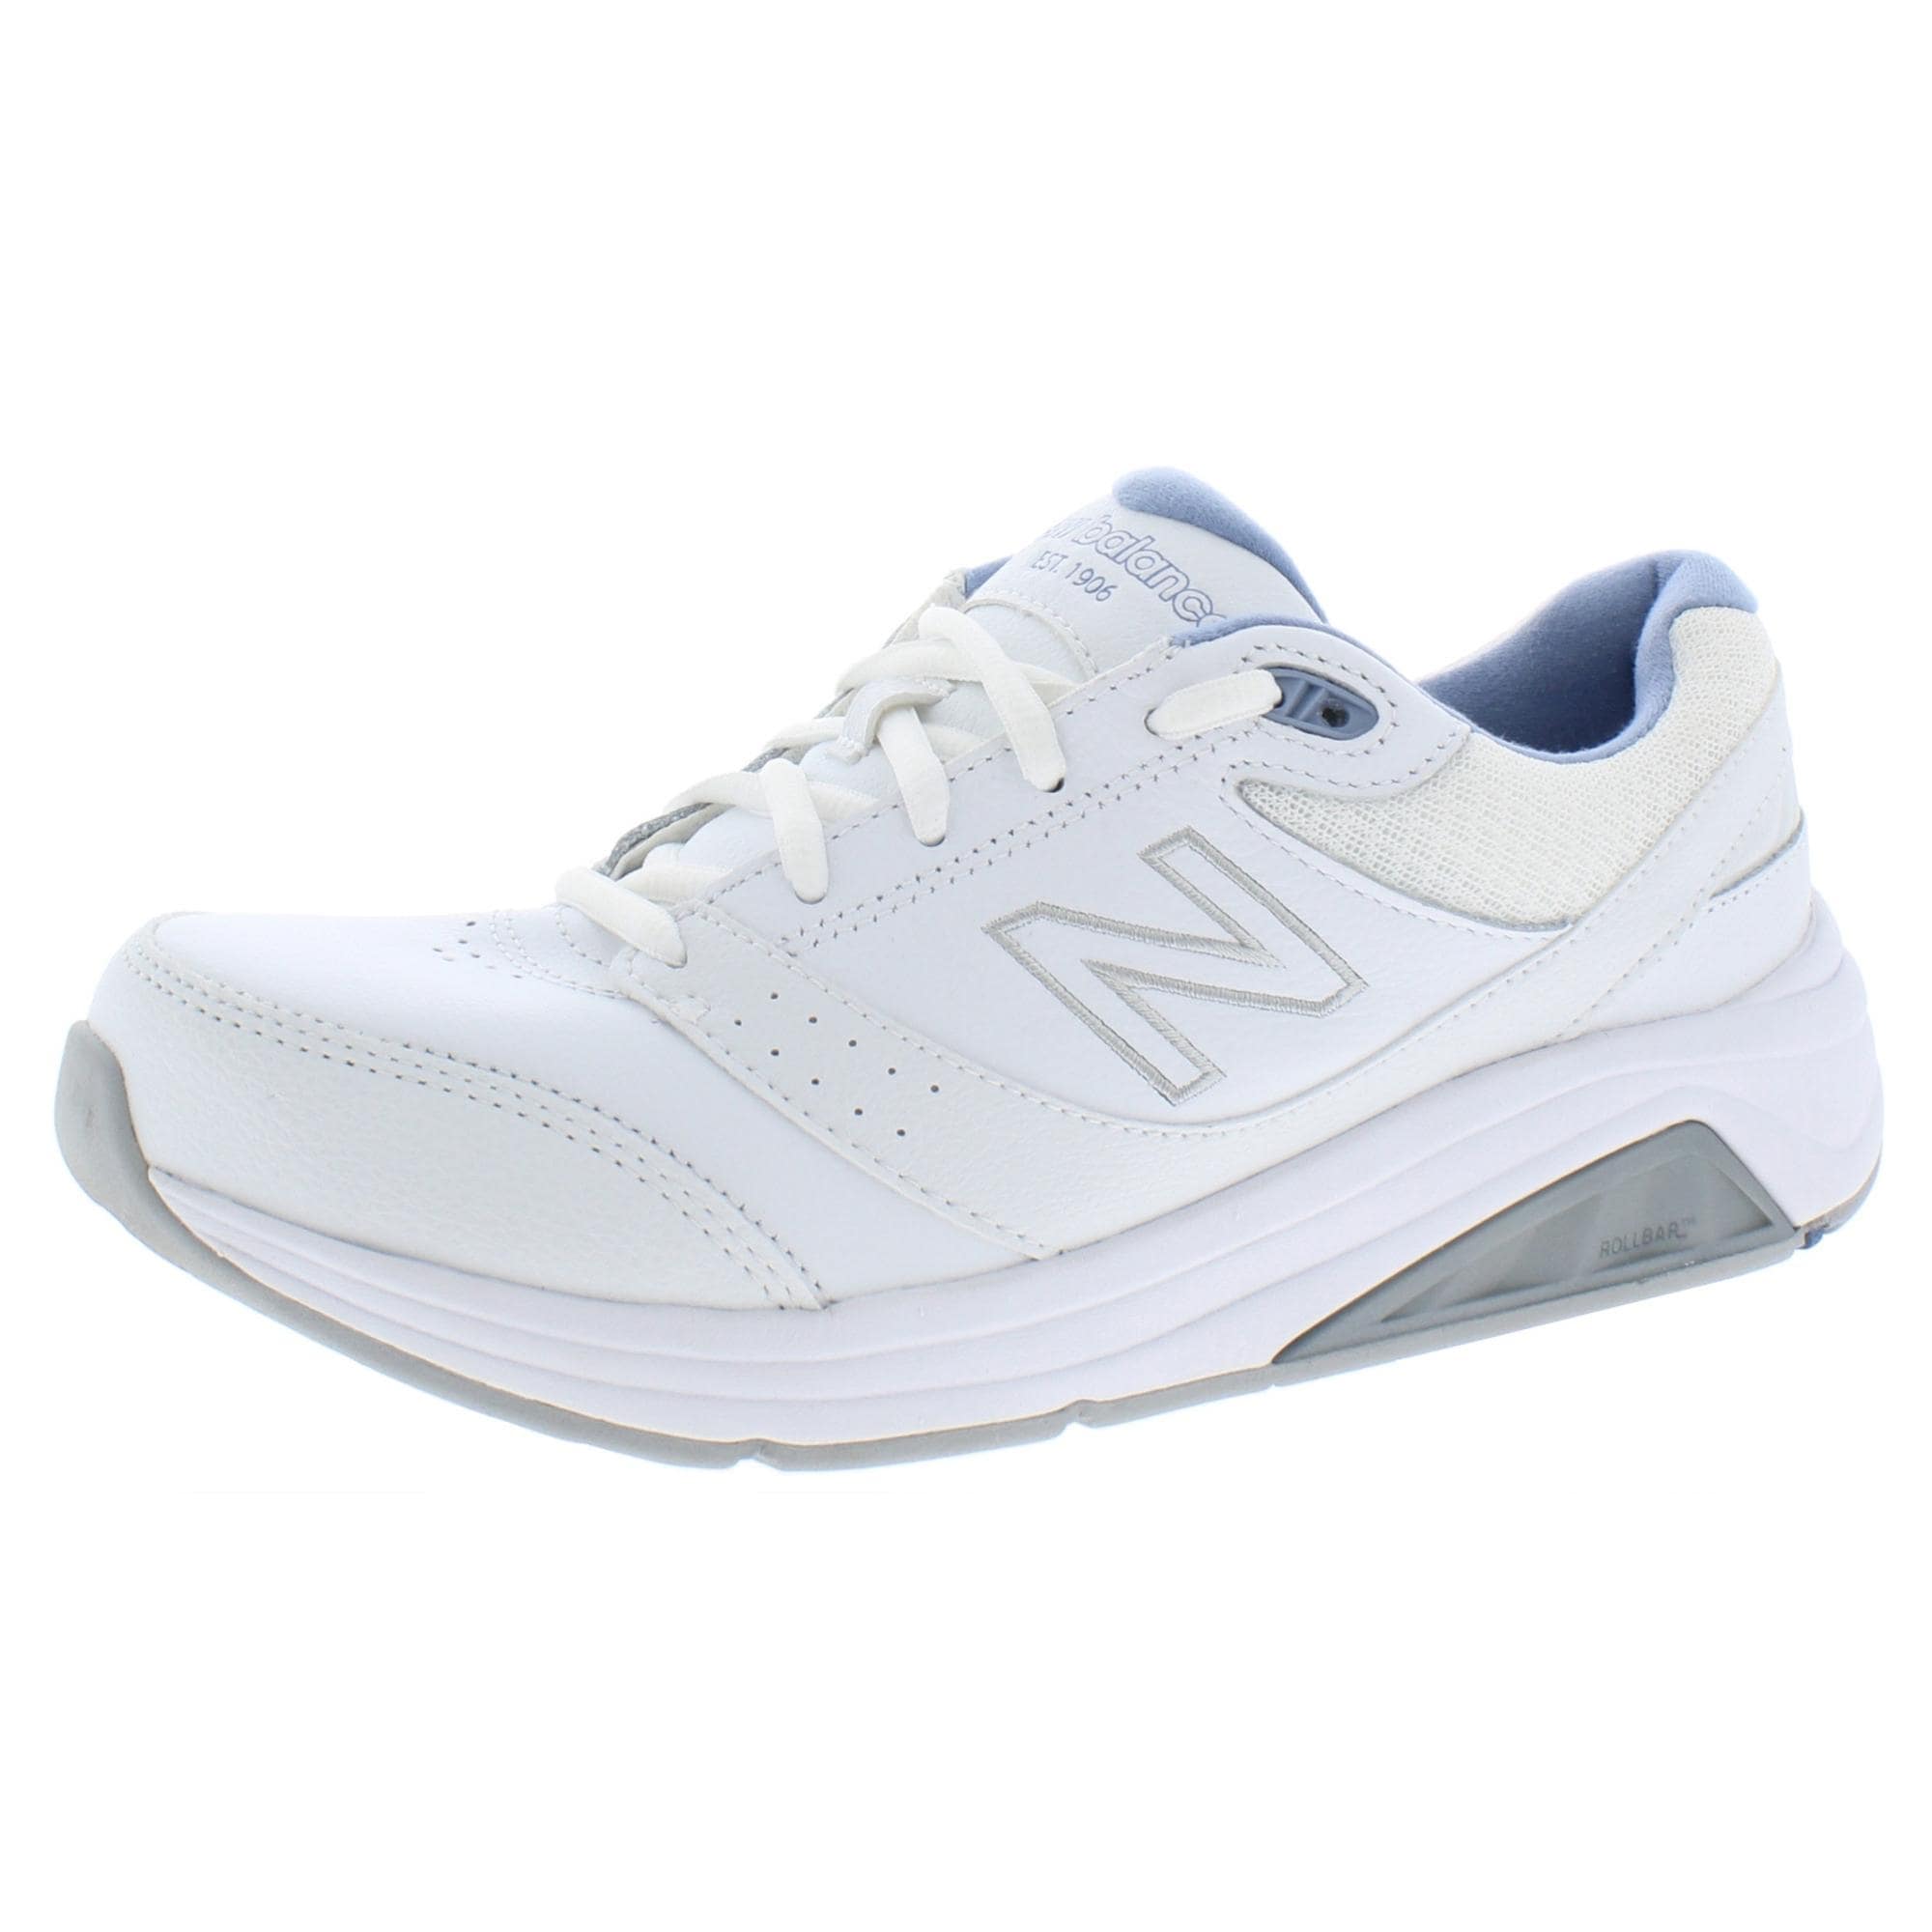 womens tennis shoes with roll bar